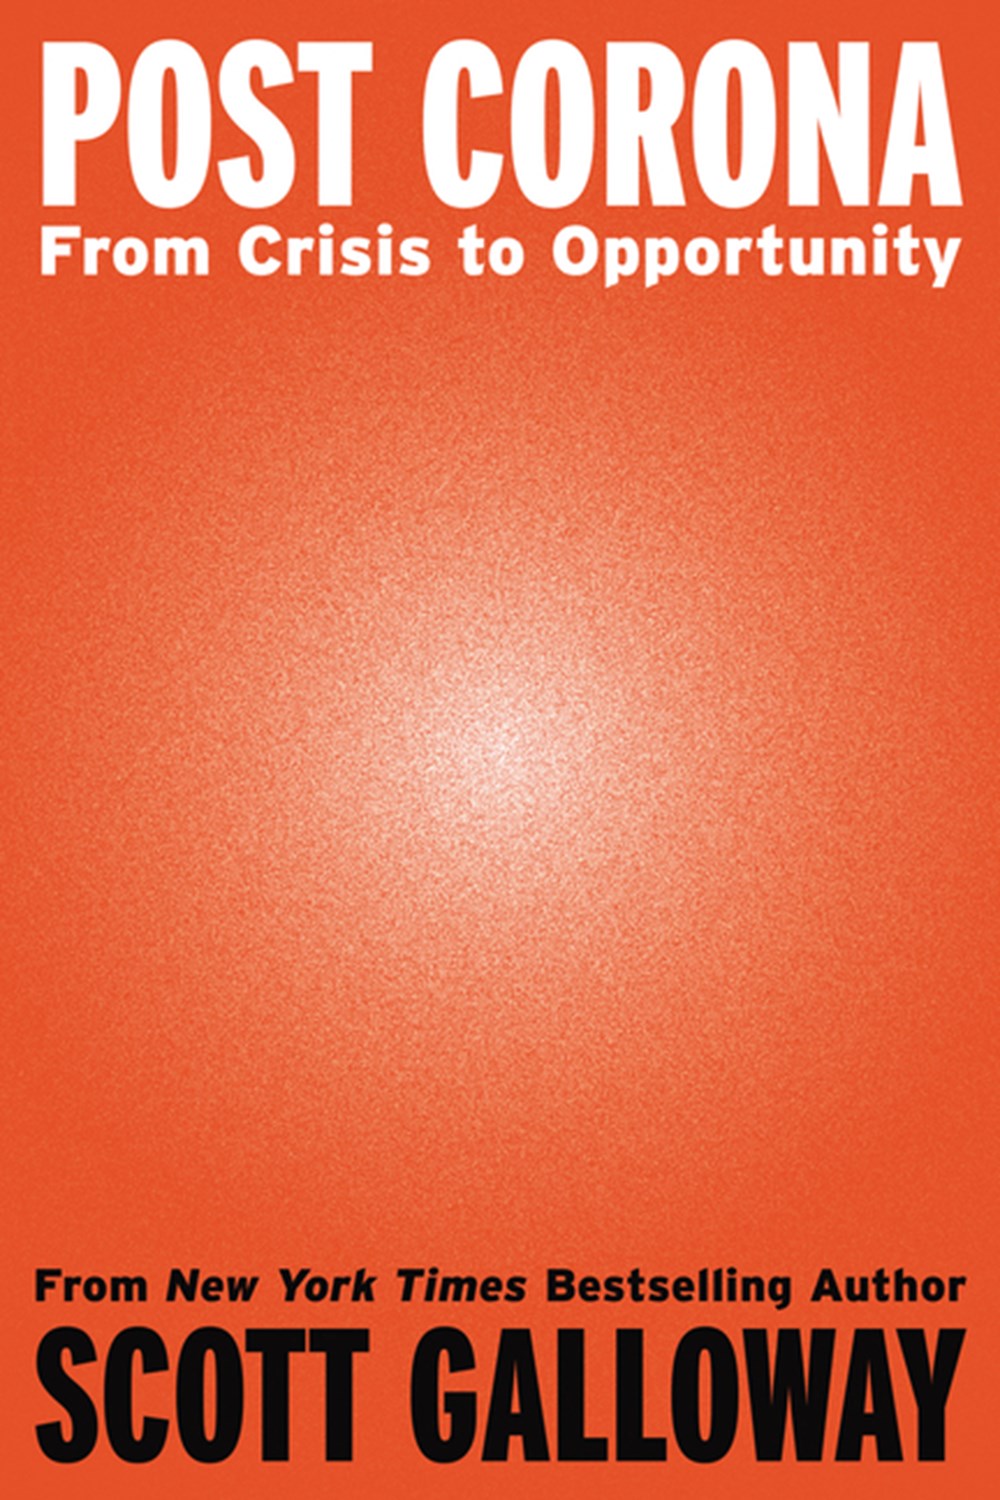 Post Corona From Crisis to Opportunity